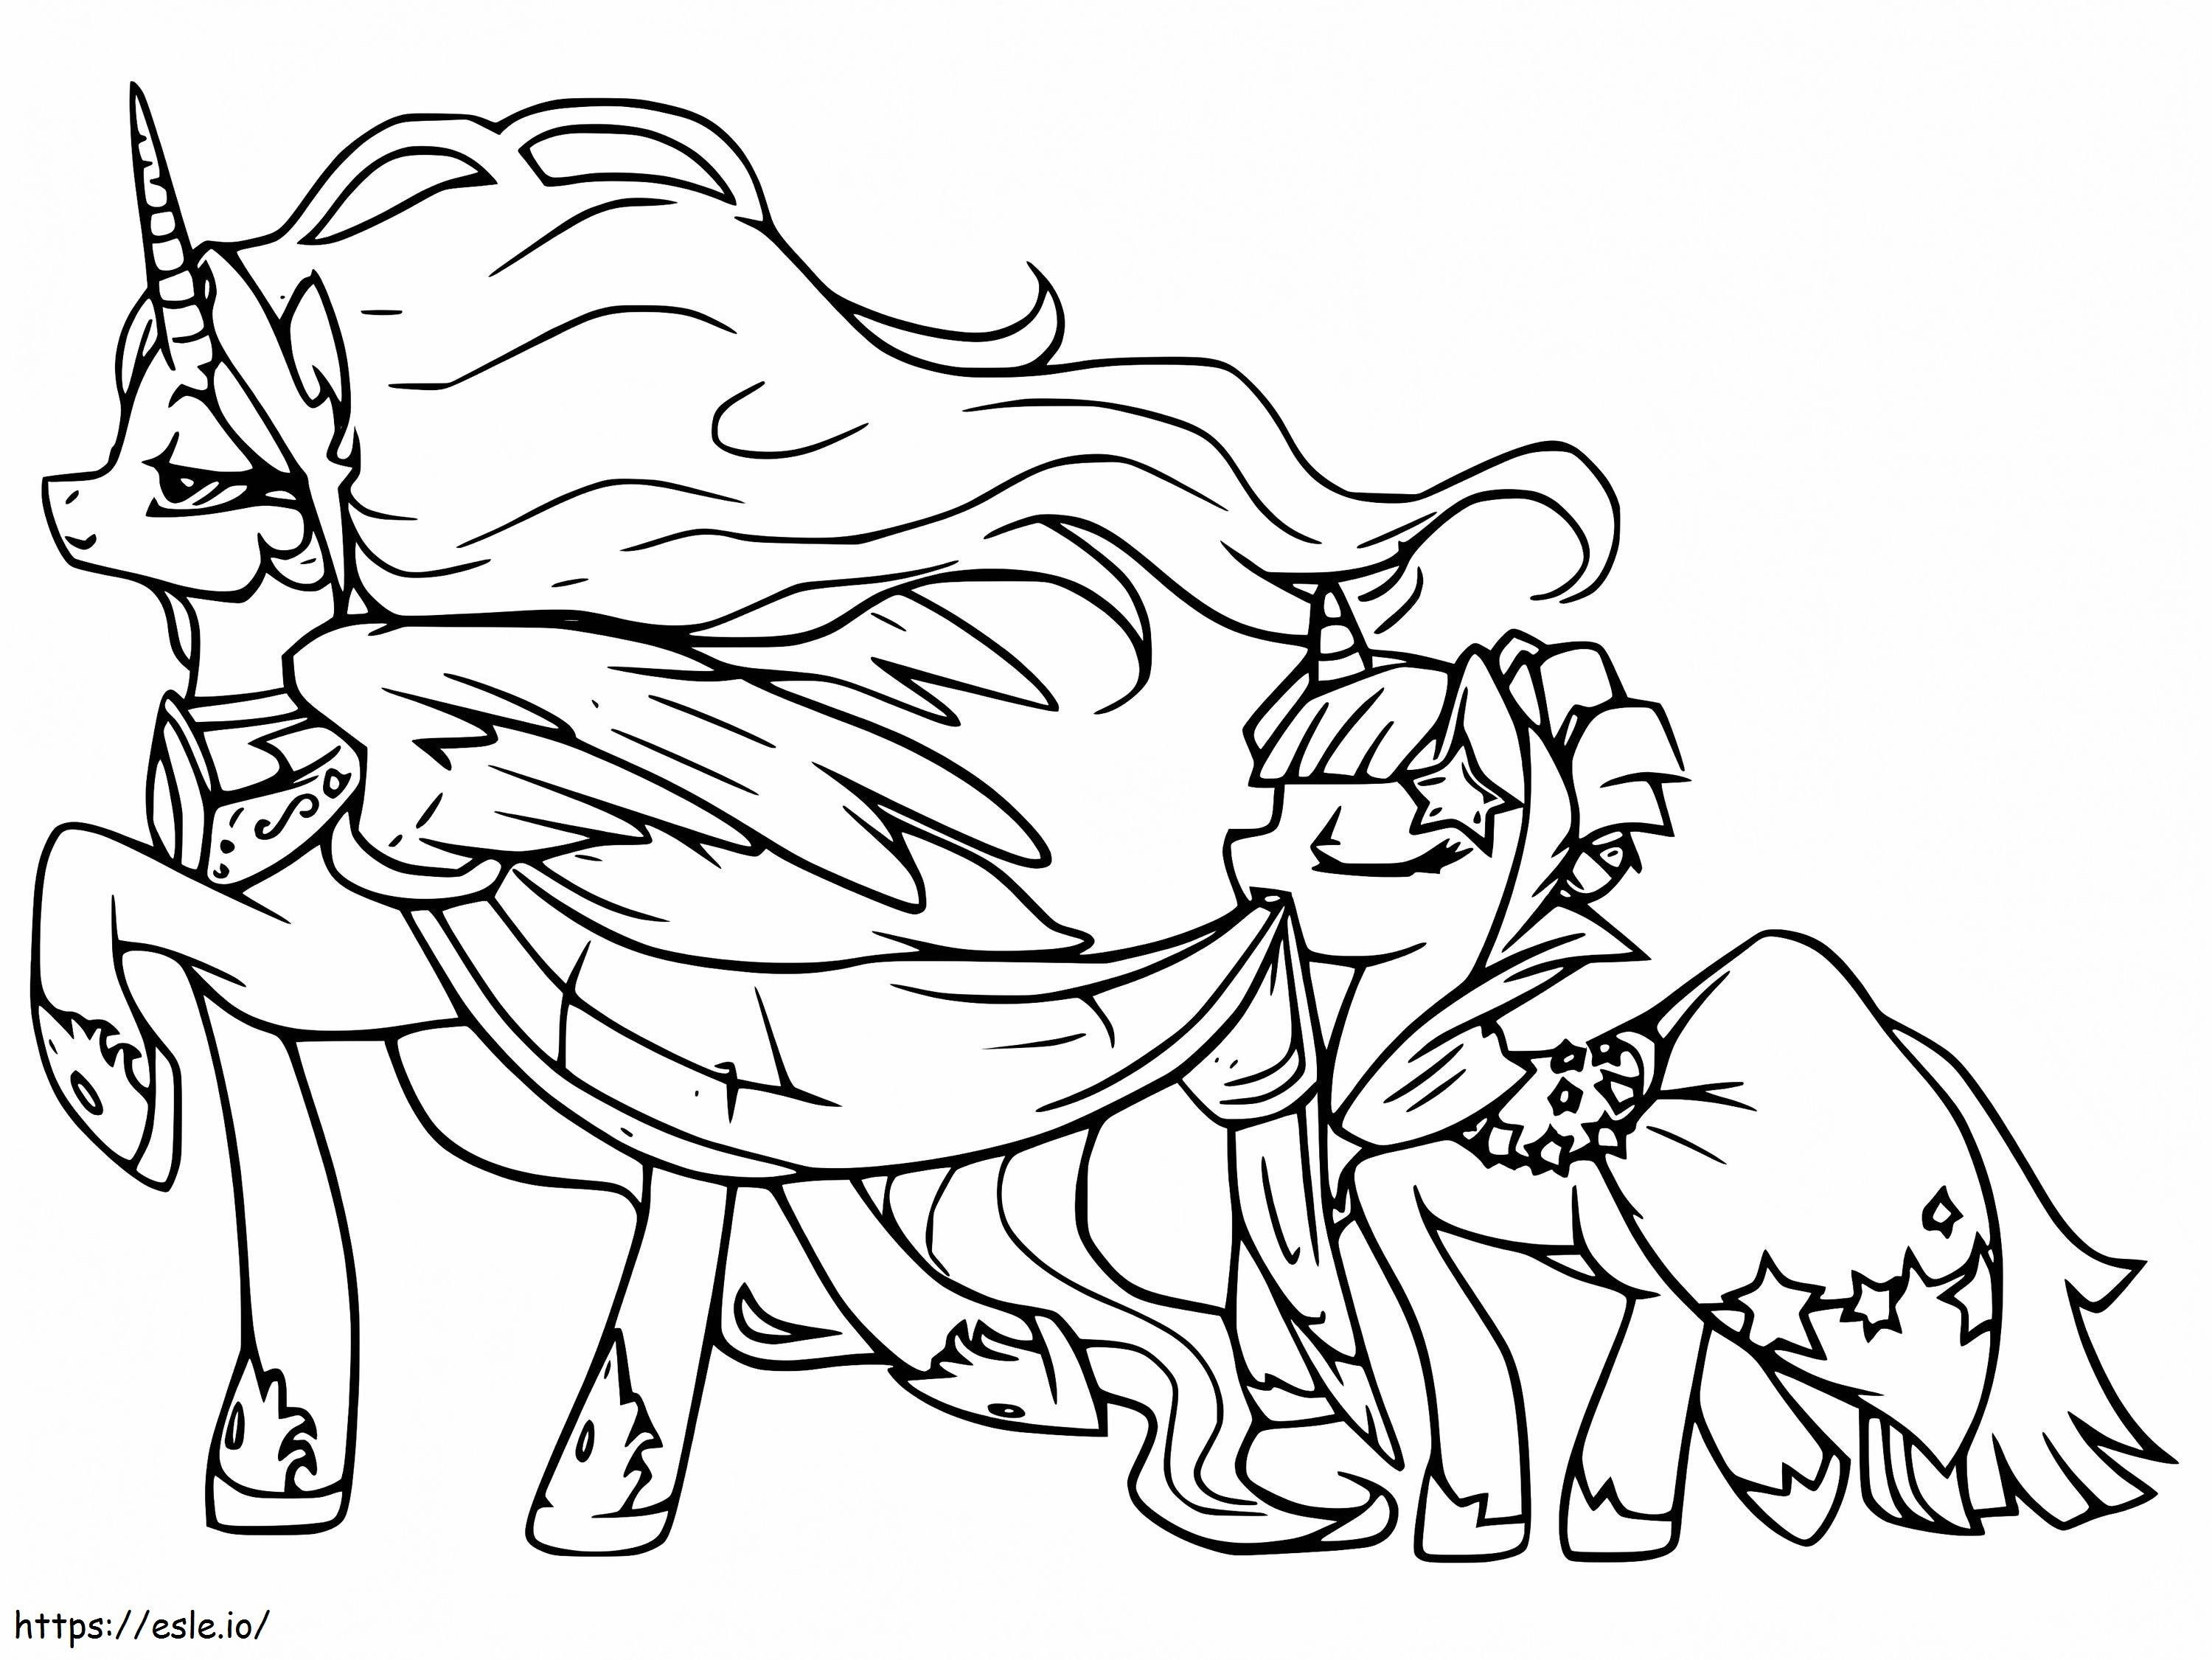 Amazing My Little Pony coloring page